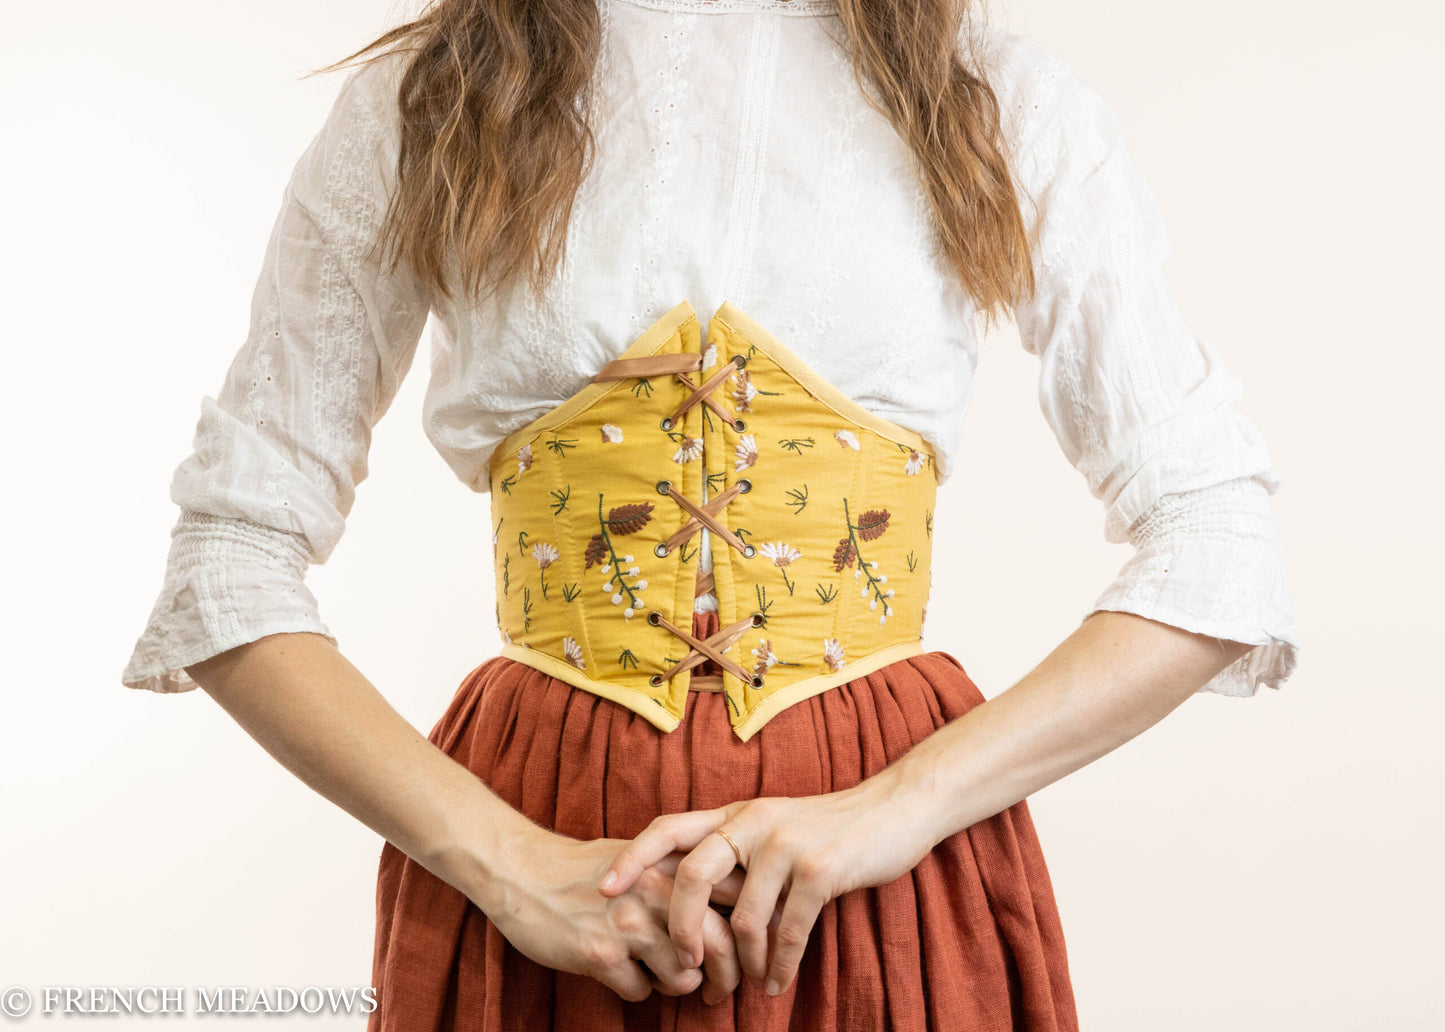 Yellow Floral Corset Belt – French Meadows